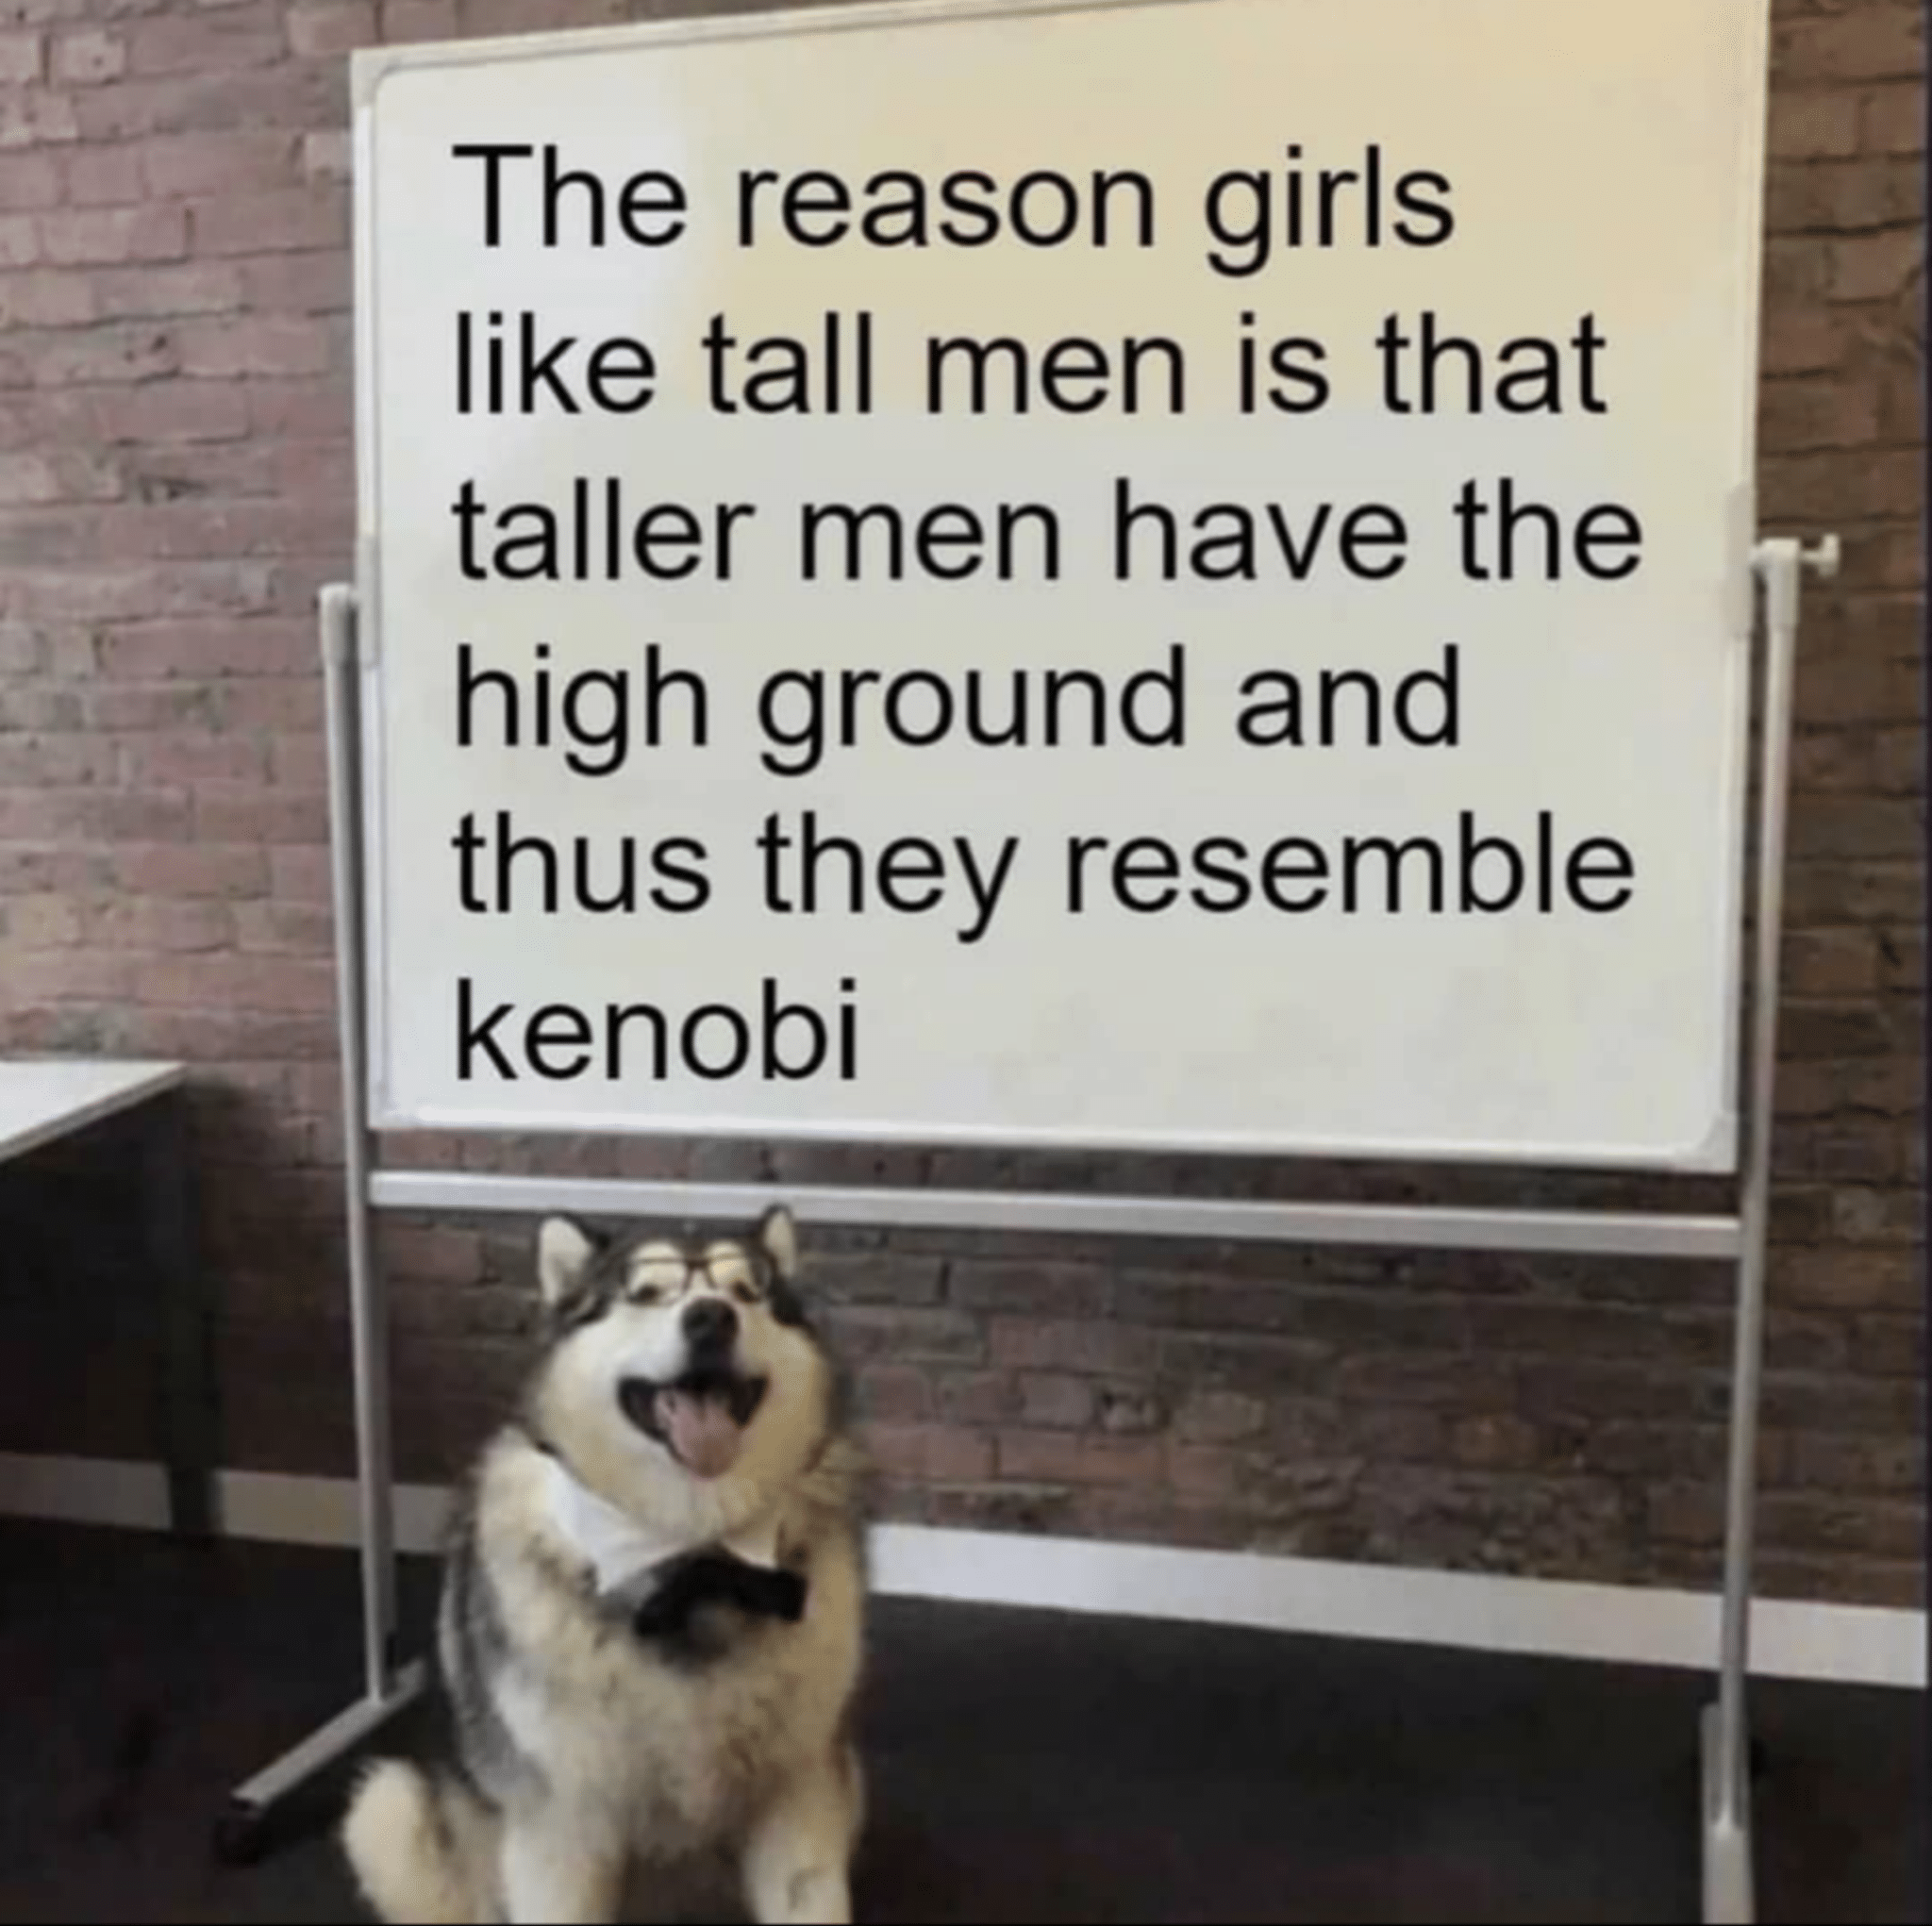 prequel-memes star-wars-memes prequel-memes text: The reason girls like tall men is that taller men have the high ground and thus they resemble kenobi 